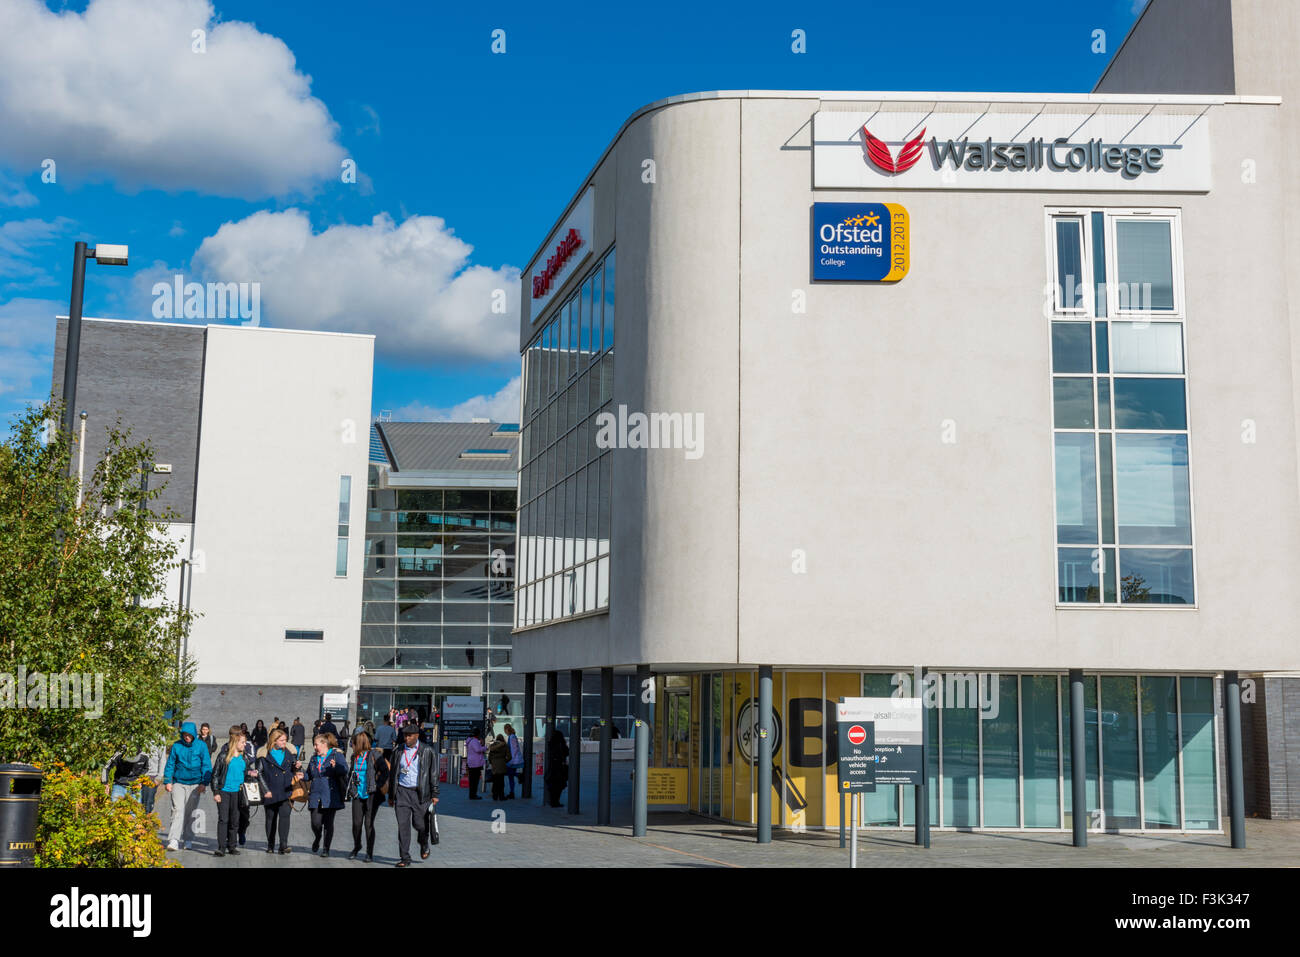 Walsall College in Walsall West Midlands, Regno Unito Foto Stock